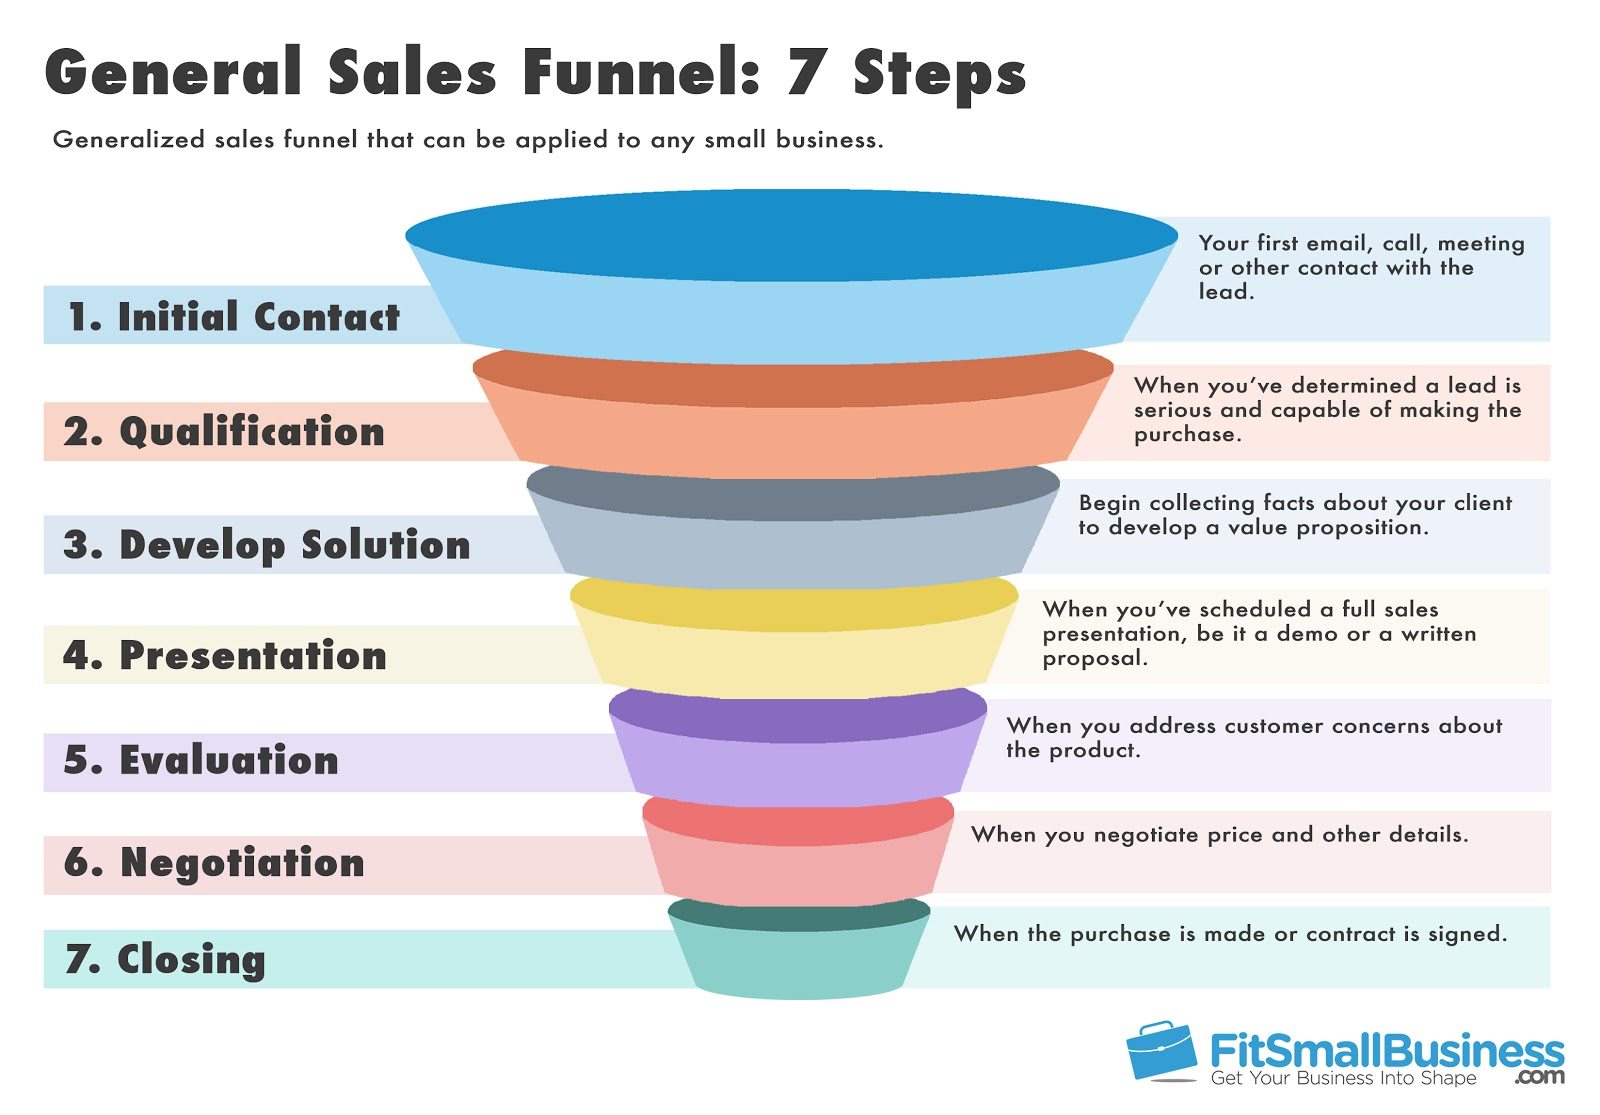 Sales Funnel Templates How To Represent Your Sales Funnel Ncma